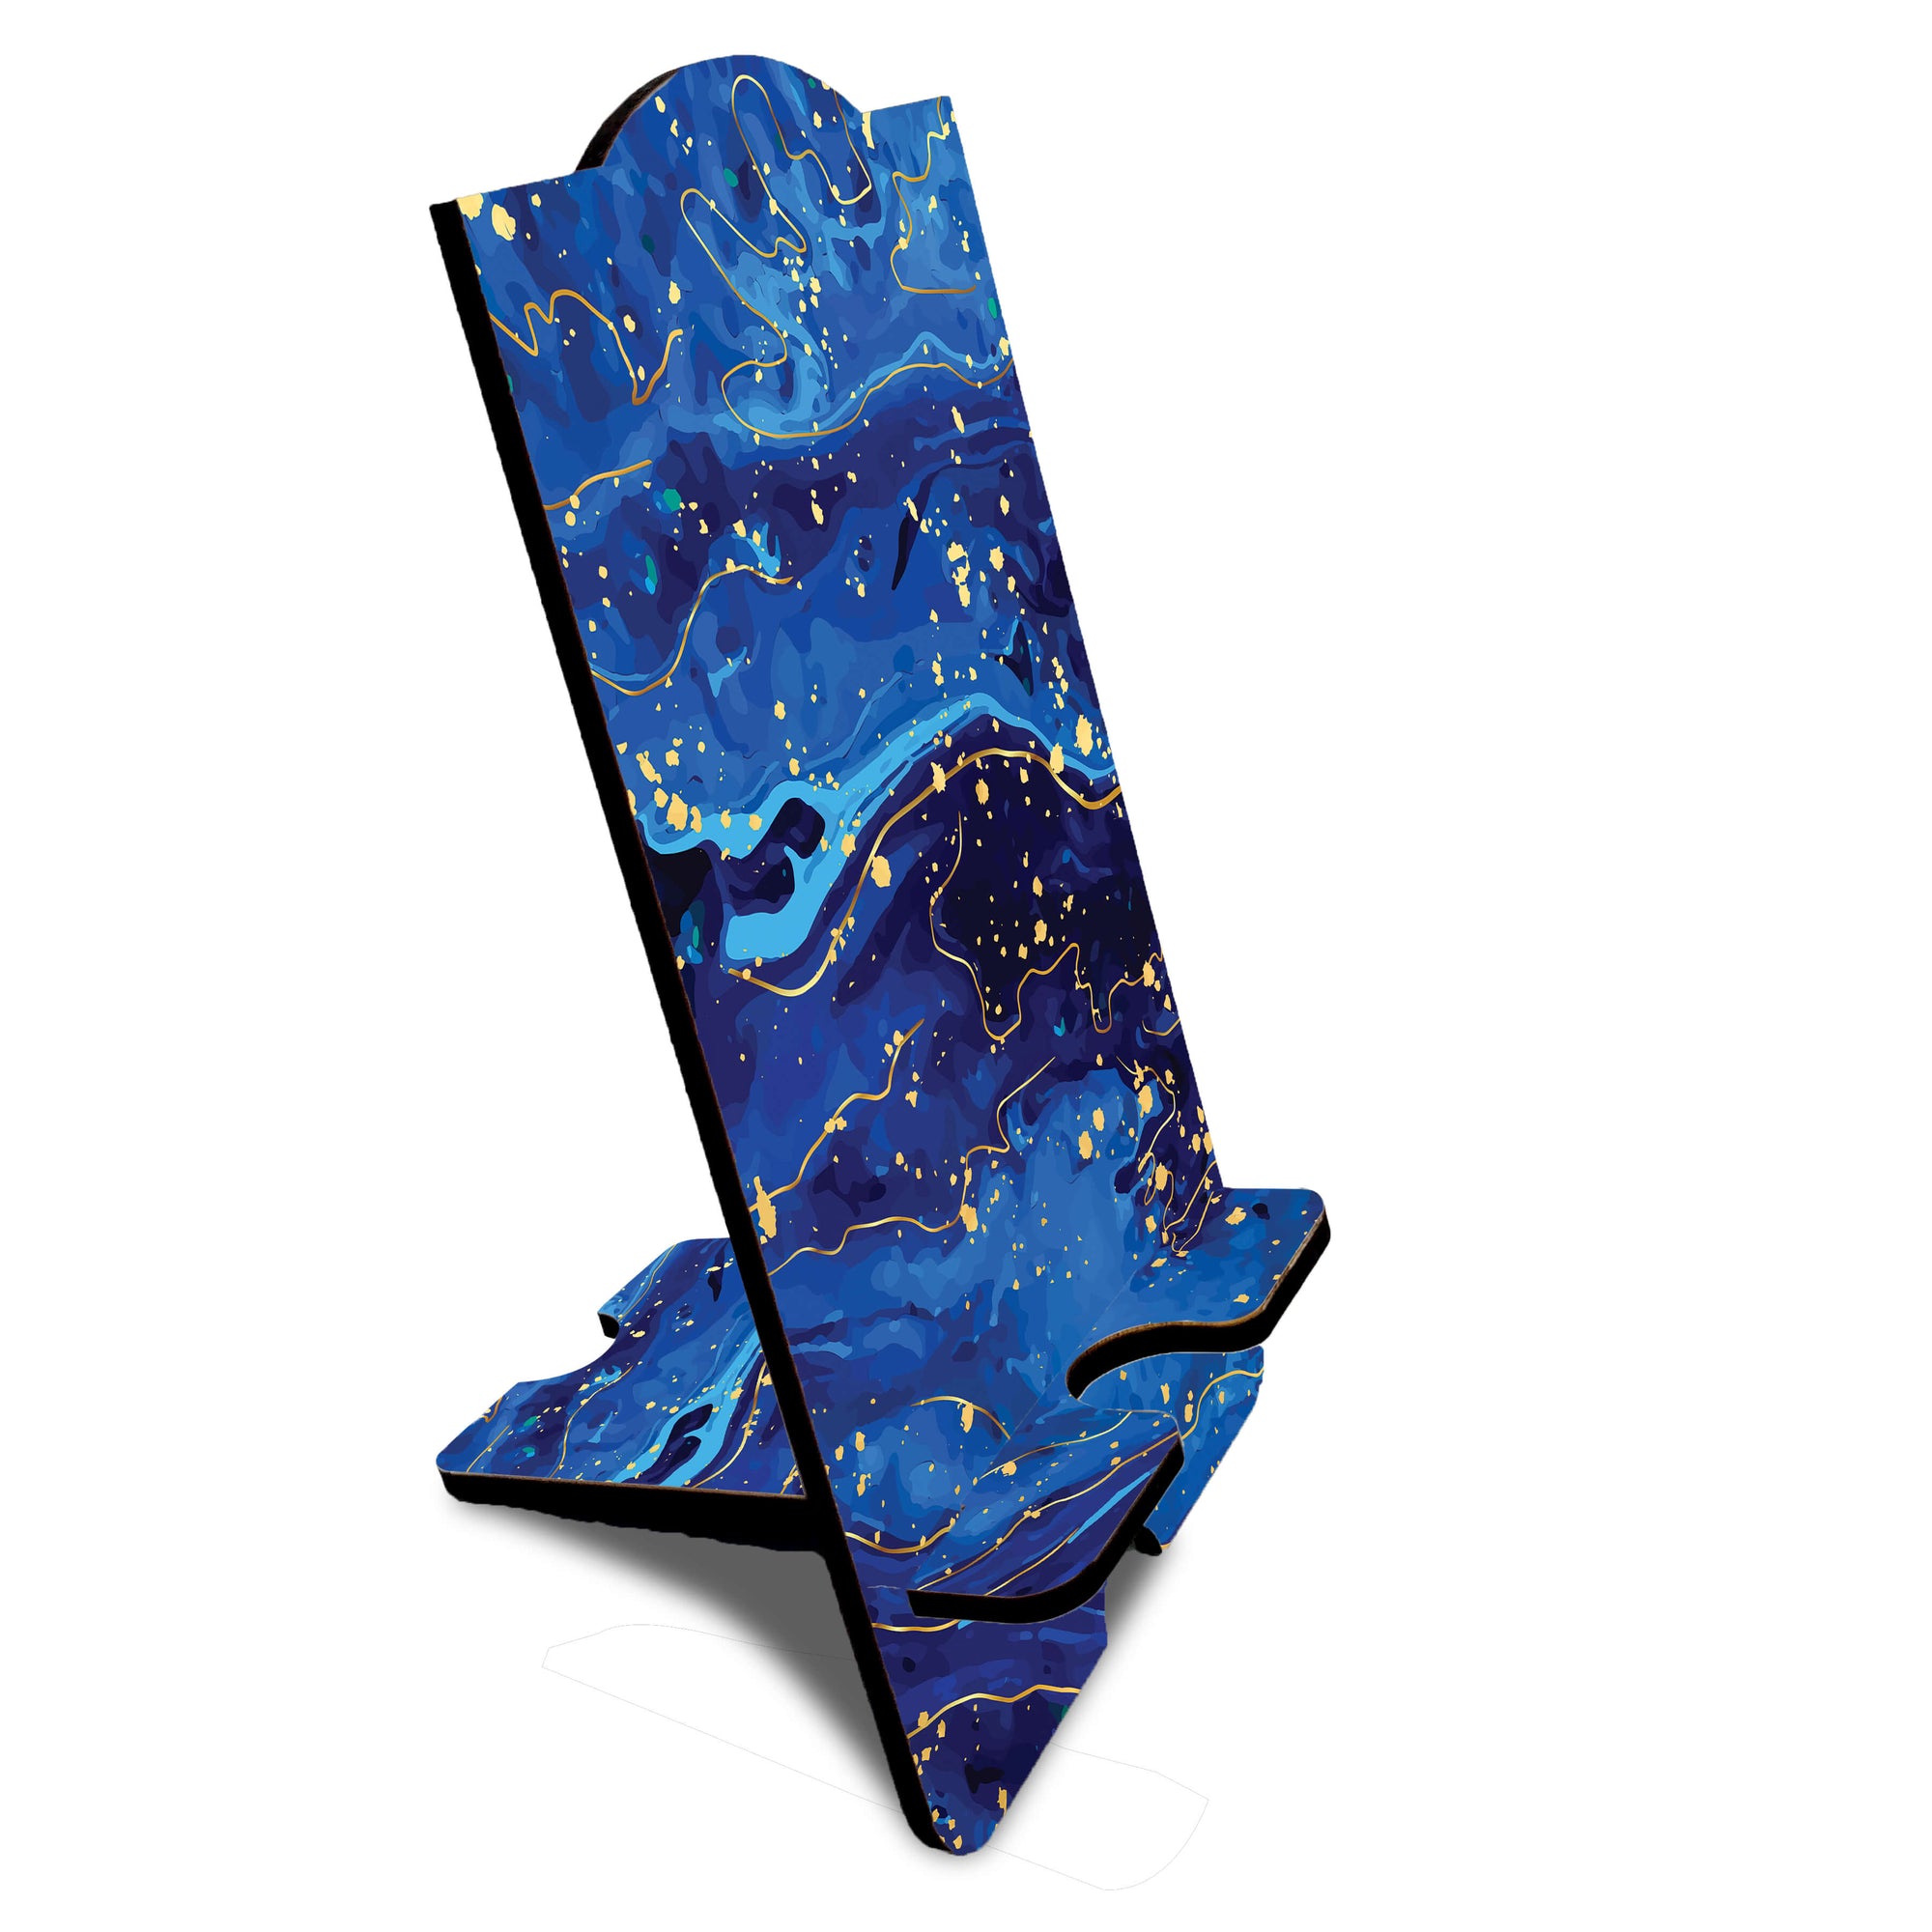 Galaxy Blue Mobile Stand